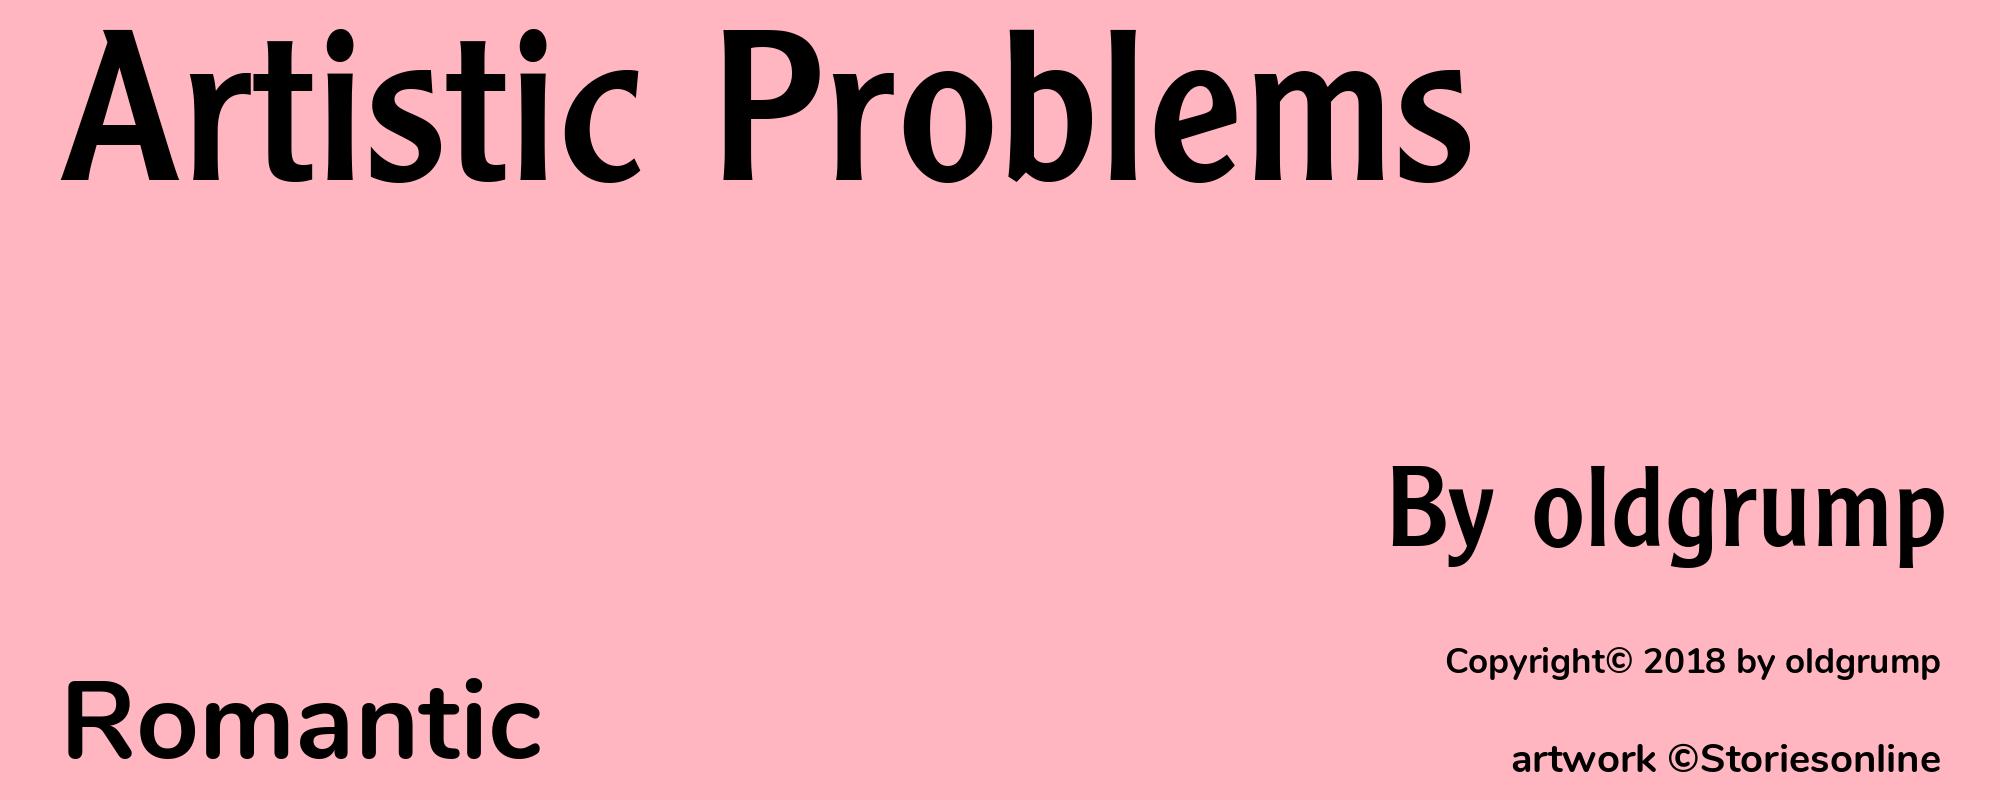 Artistic Problems - Cover